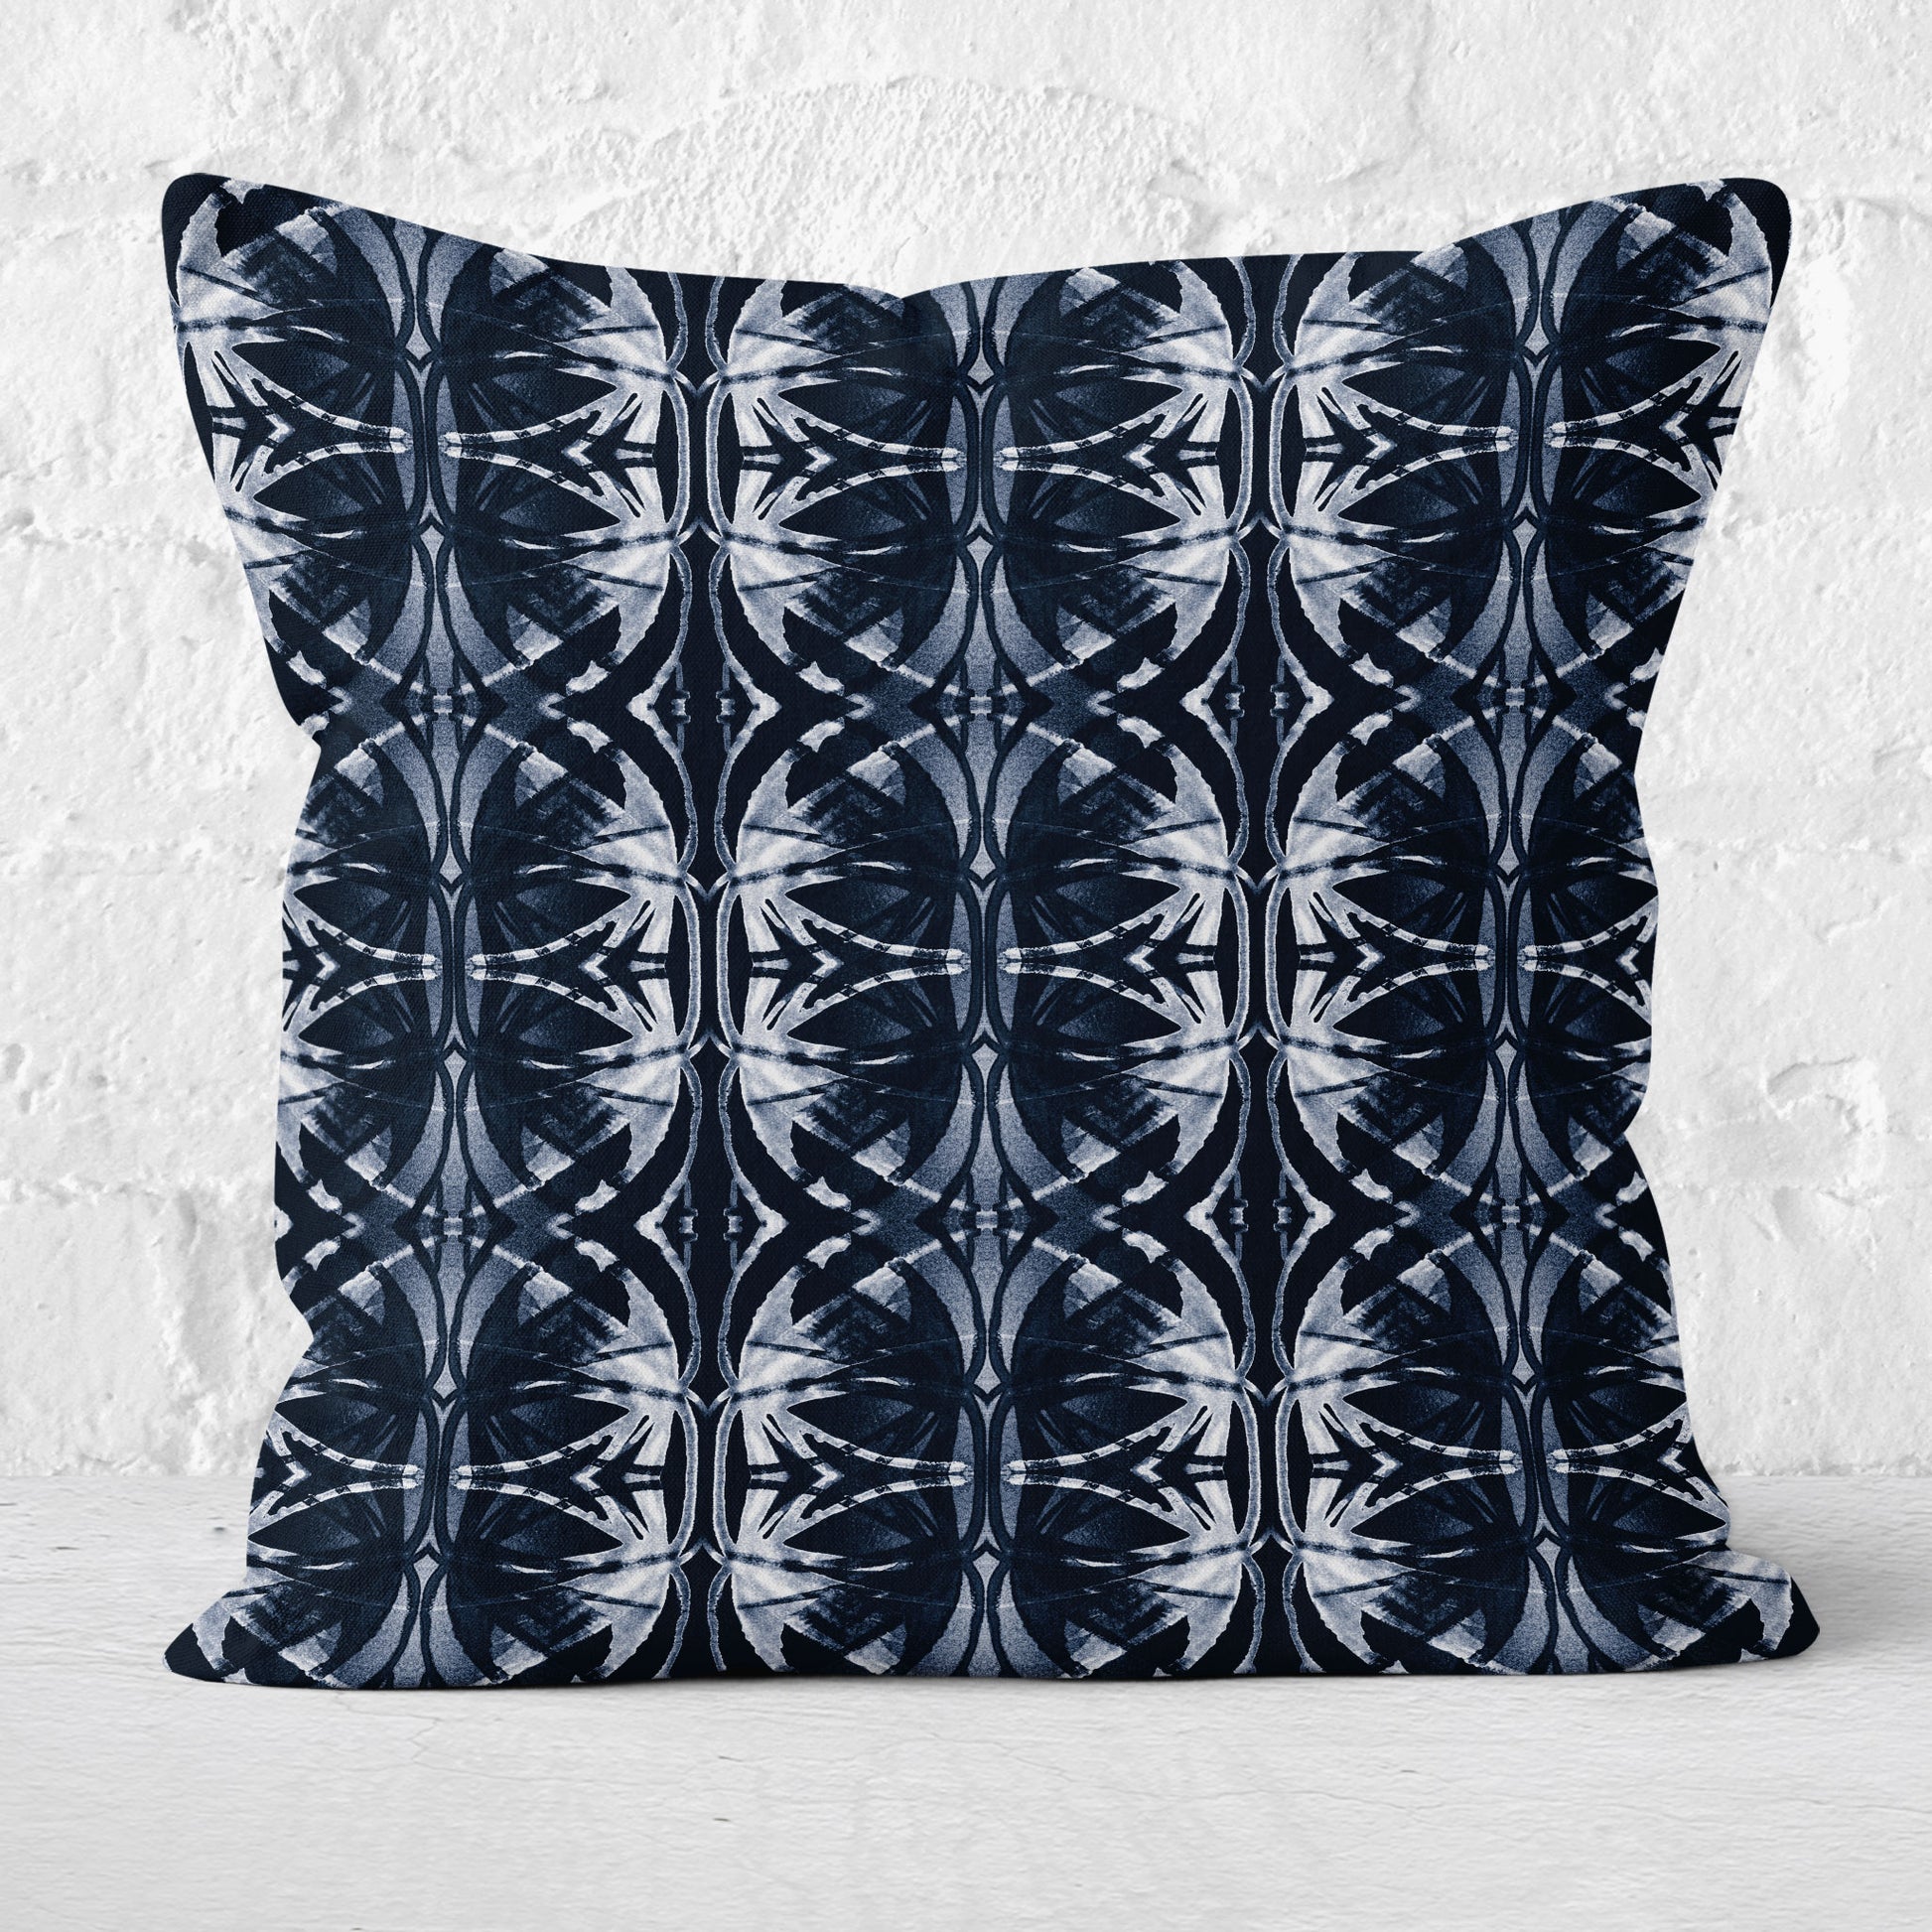 Square throw pillow featuring a dark blue and white abstract pattern sitting against a white brick background